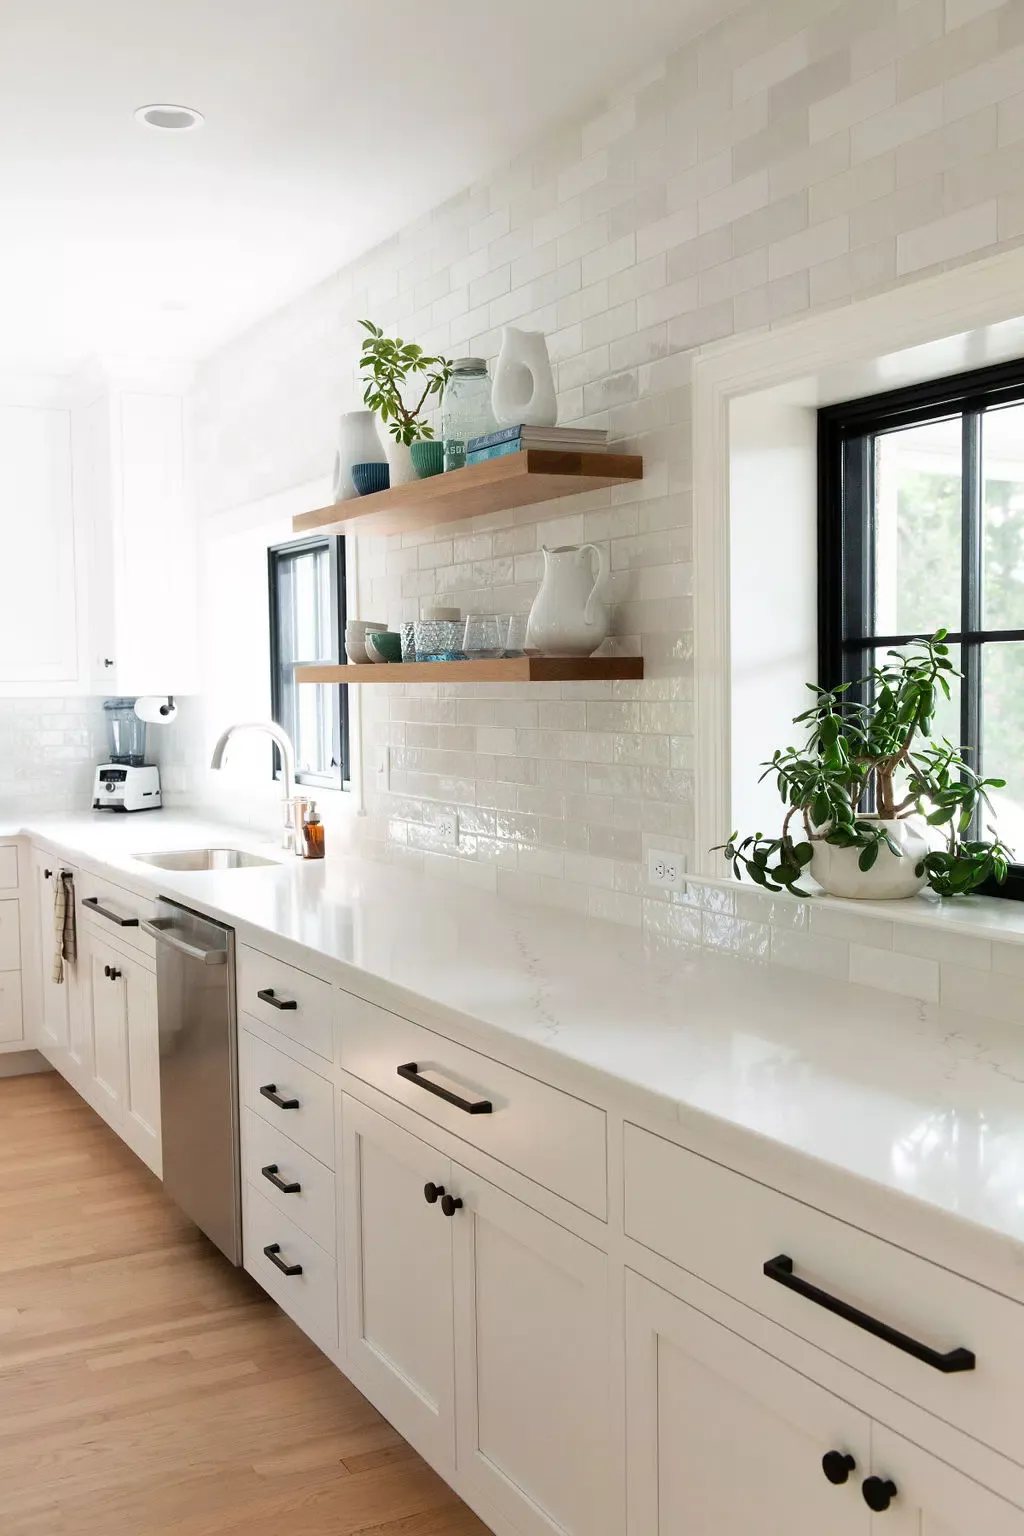 Countertop For The Kitchen Top Options for Your Kitchen Counters – Which One Will You Choose?